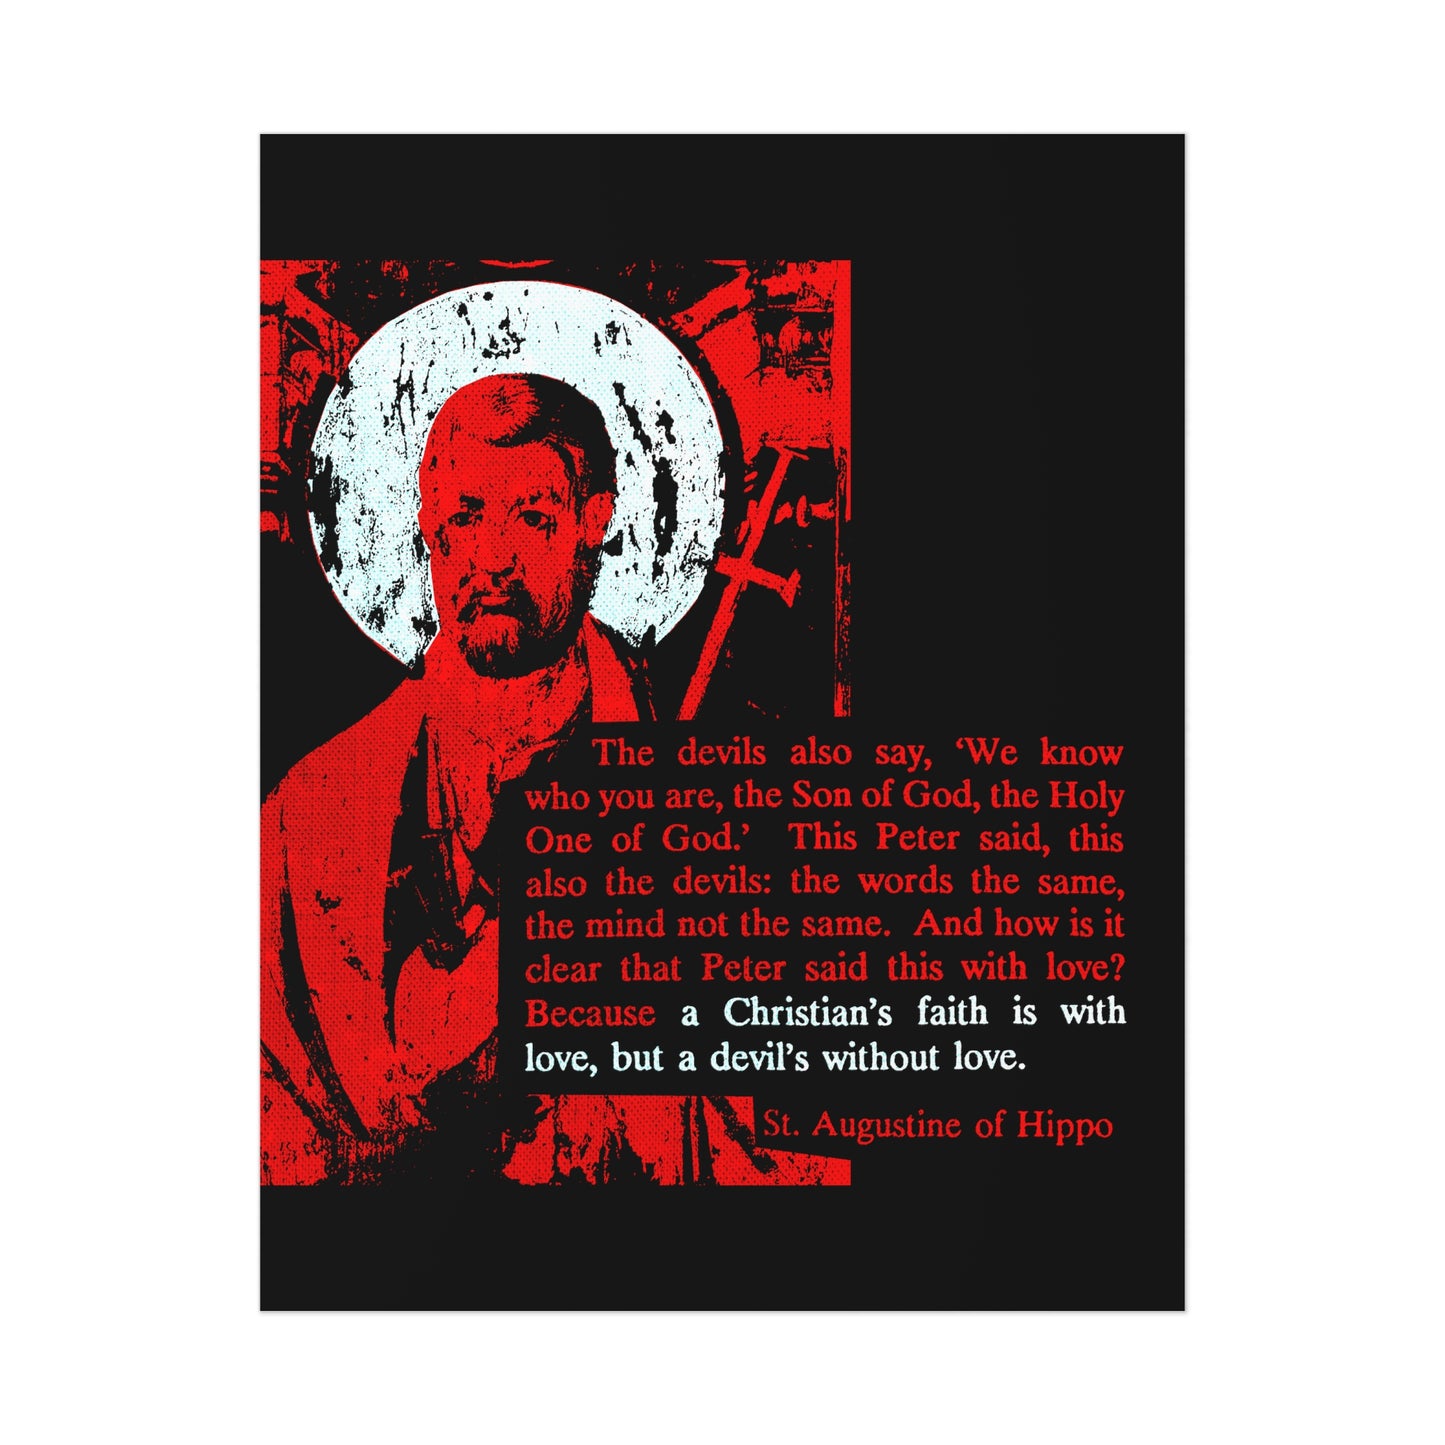 The Devil's Faith is Without Love (St. Peter, St. Augustine) No. 1 |  Orthodox Christian Art Poster